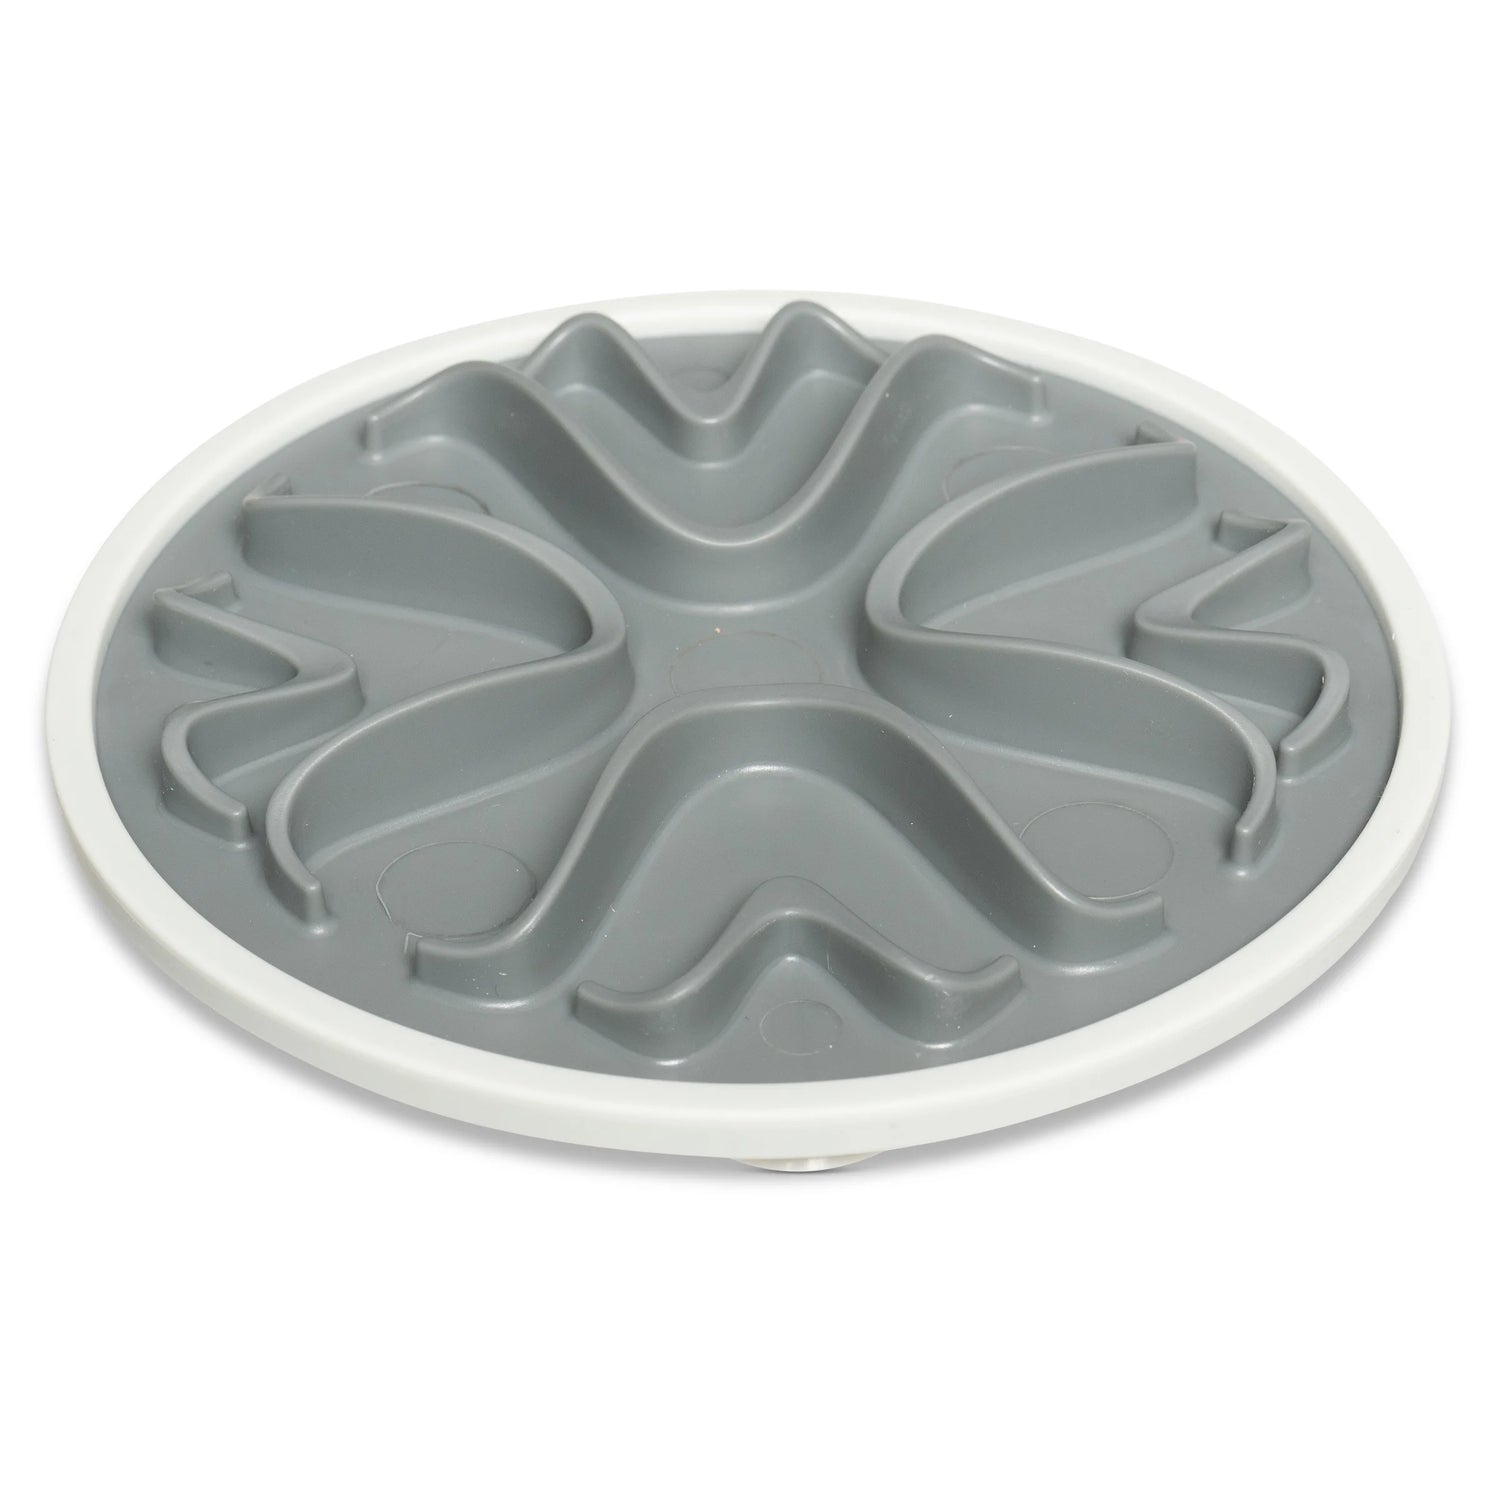 Top view of grey cat slow down feeder. Dark grey and light grey soft exterior. 